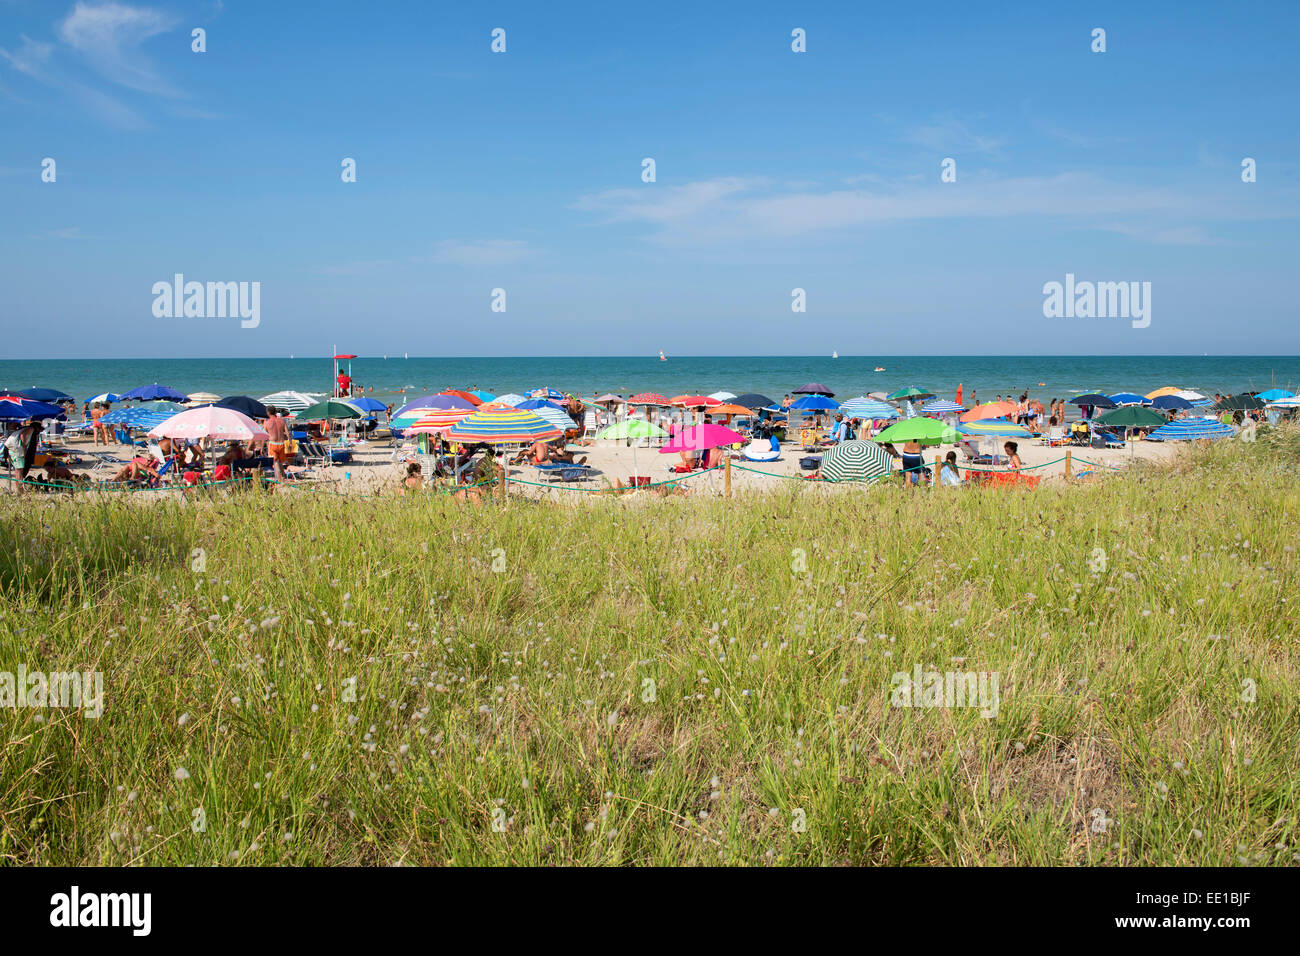 Sea and a sandy beach with sunshades, grass at the front, Senigallia, Province of Ancona, Marche, Italy Stock Photo